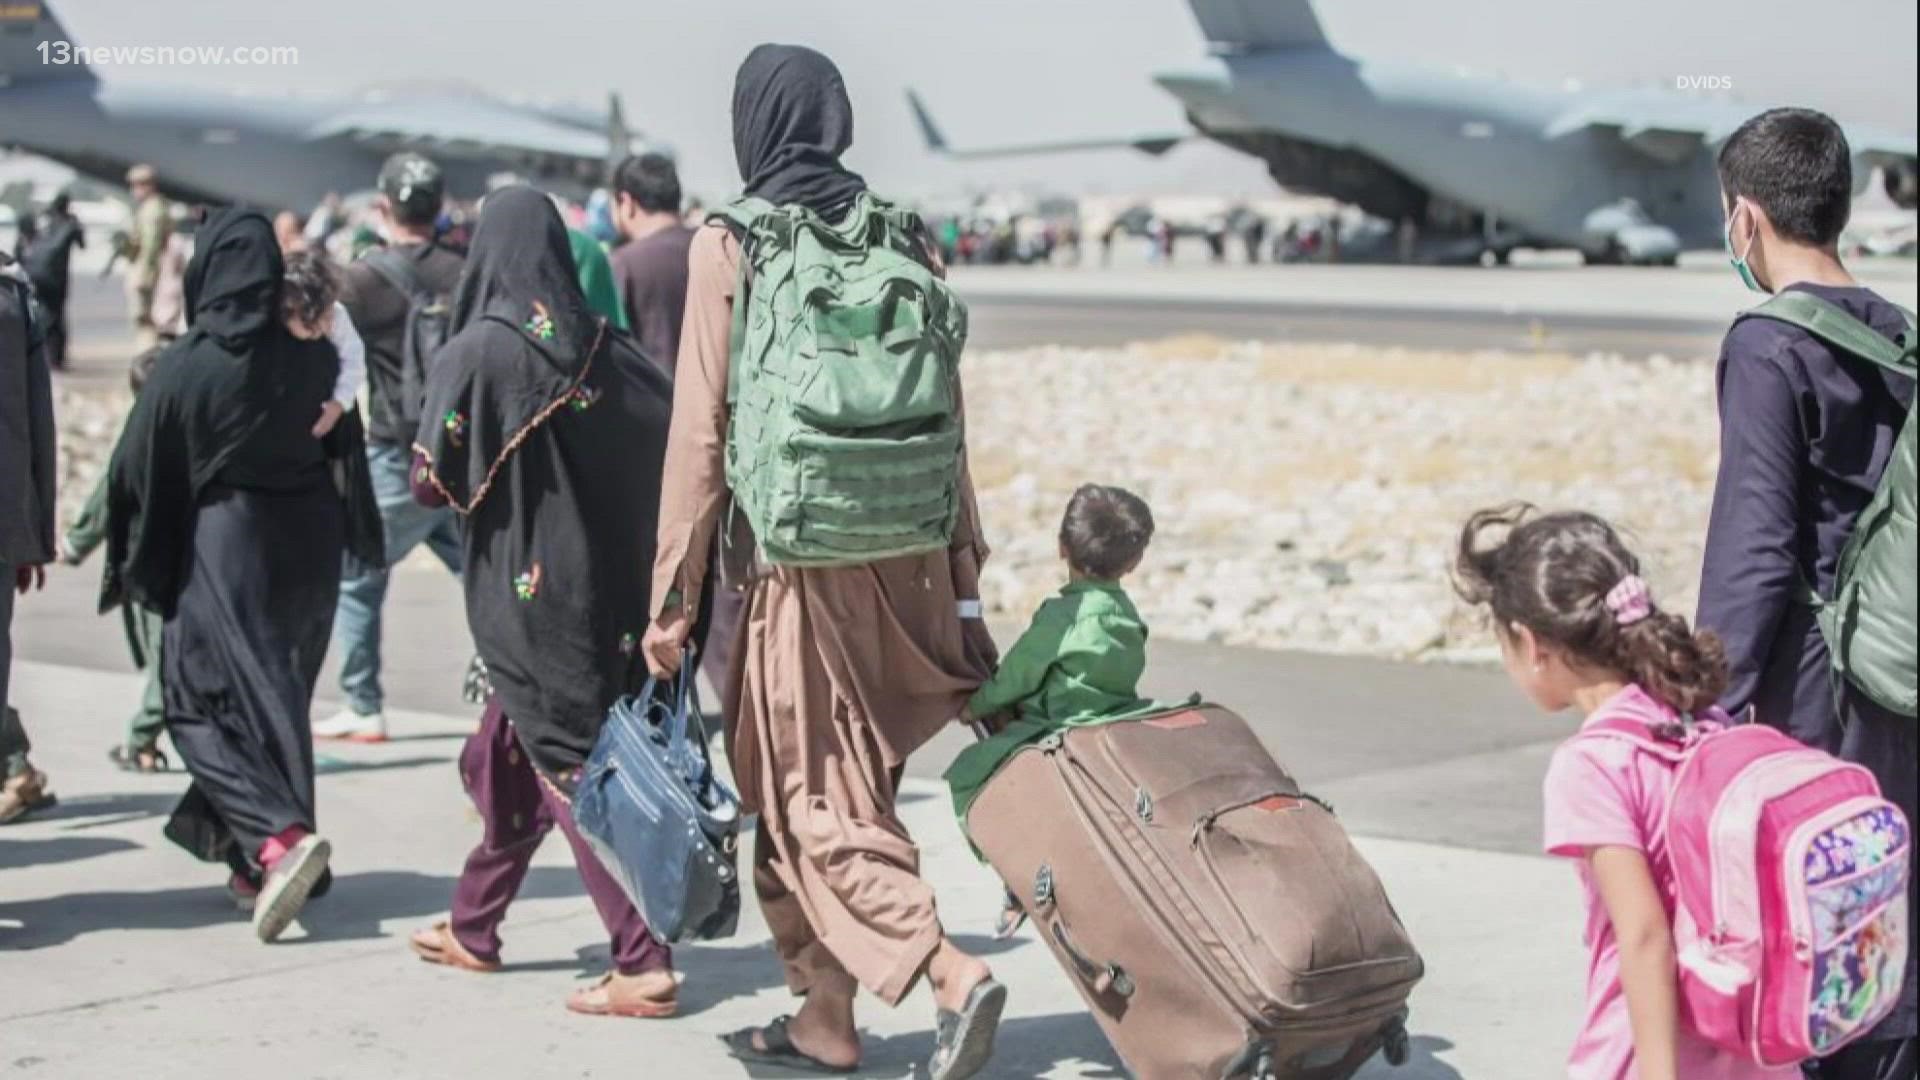 More than 14,000 Afghan nationals and U.S. citizens have arrived in Virginia since Afghanistan evacuation operations began.